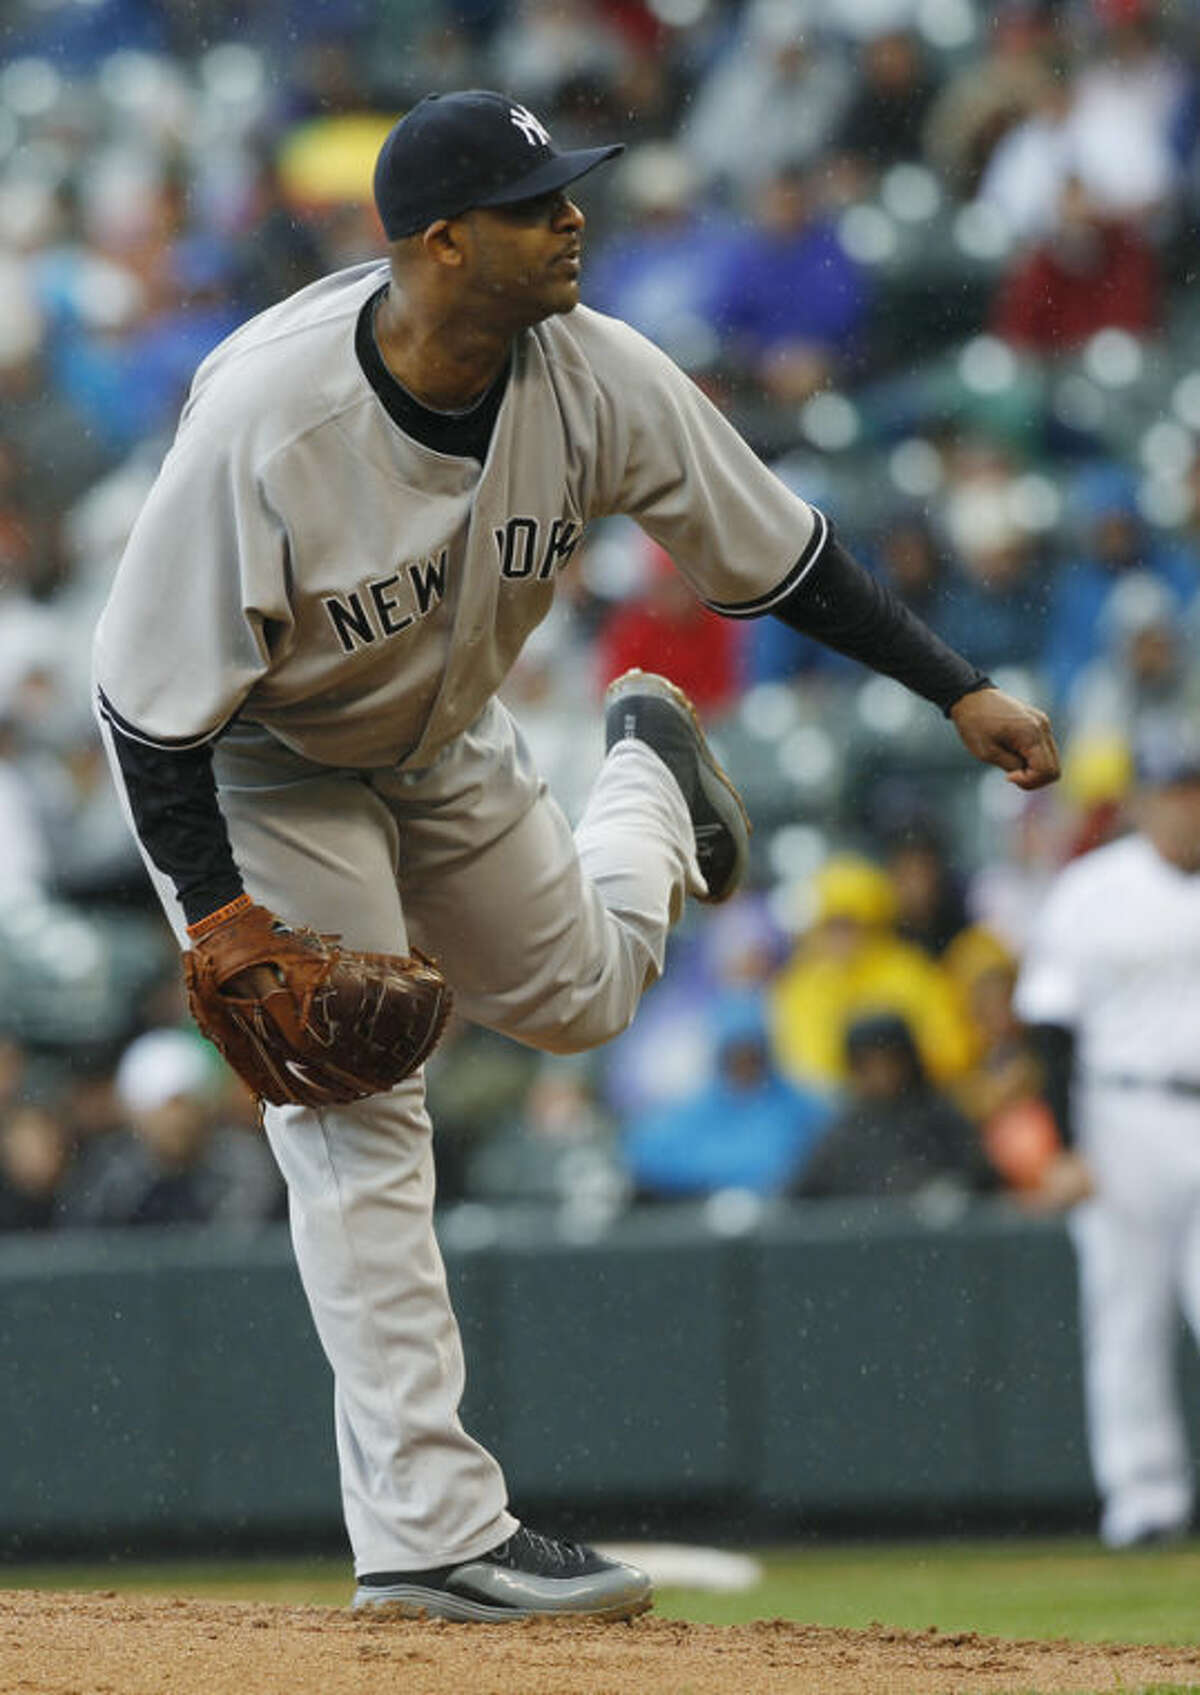 New York Yankees starting pitcher CC Sabathia works against the Colorado Rockies in the first inning of a baseball game in Denver on Thursday, May 9, 2013. (AP Photo/David Zalubowski)